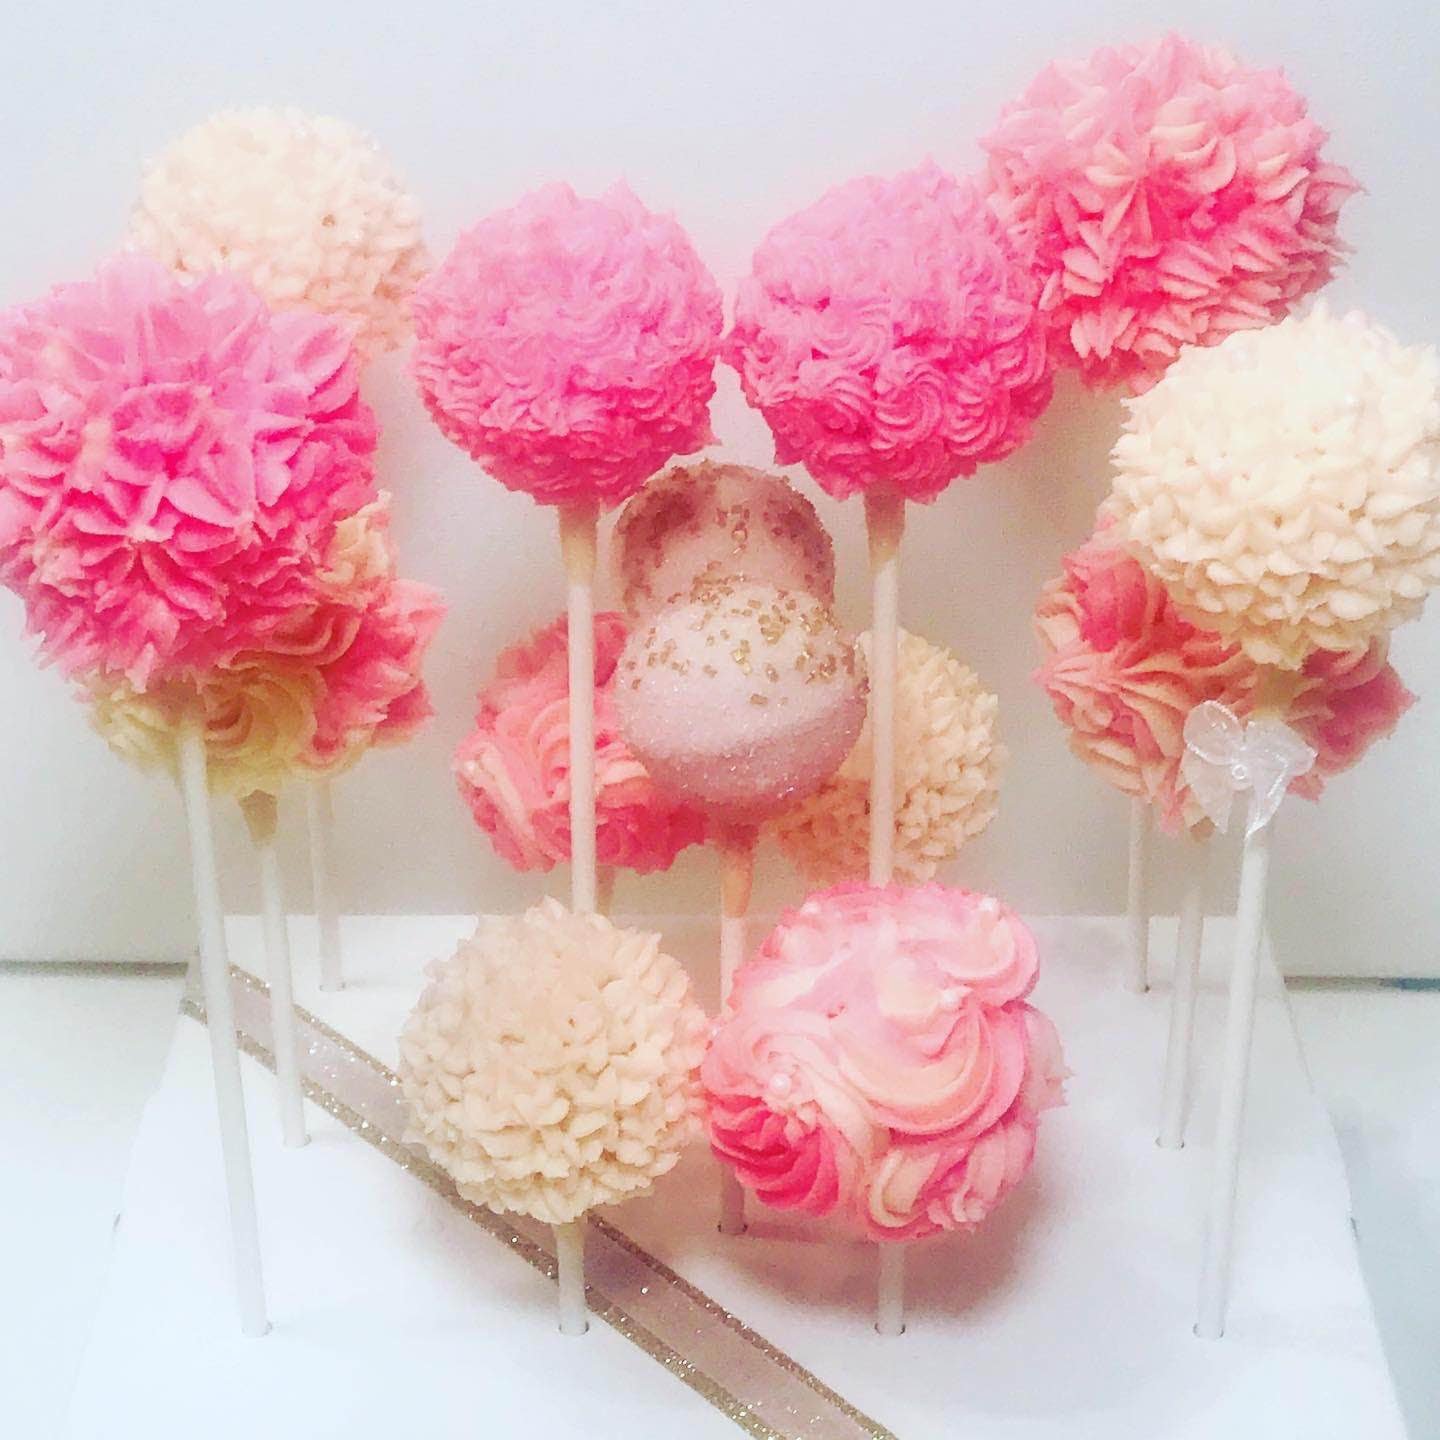 pink and white decorated cake pops from Cakepop Bakery